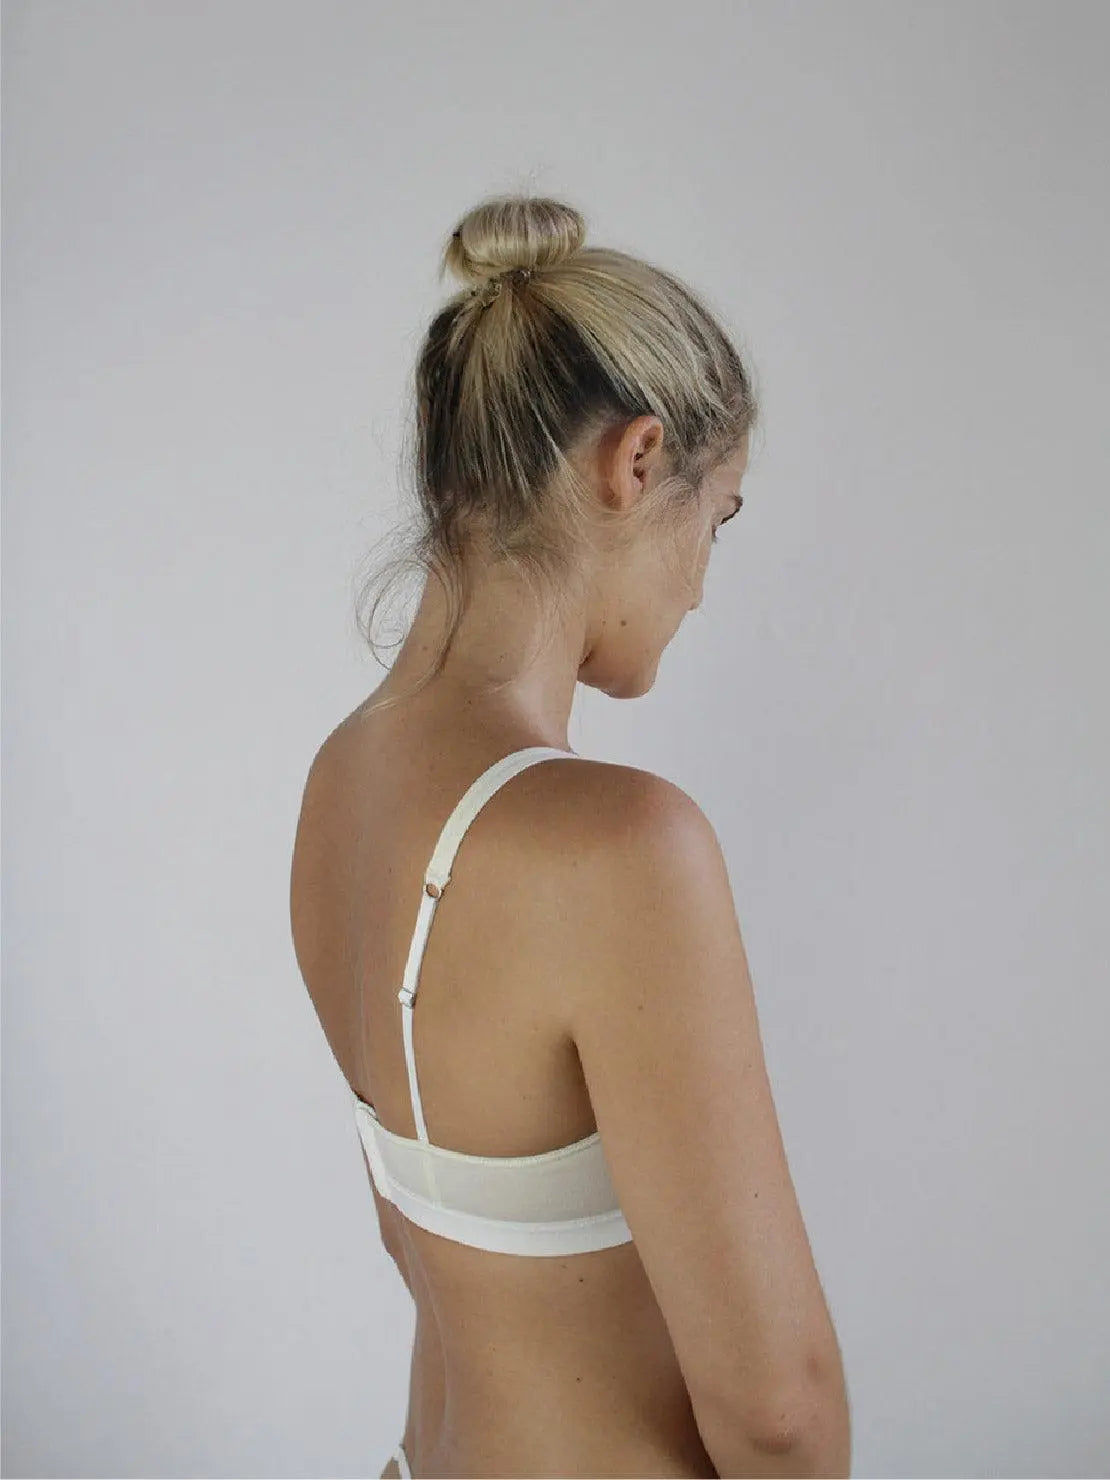 Close-up of a person wearing an Ecru Mia Organic Cotton Bra with thin straps from Talk Under Light. The bra features a deep V-neck design and a wide elastic band under the bust for support. The image captures the upper torso against a plain, light background, reminiscent of Barcelona's effortless style.